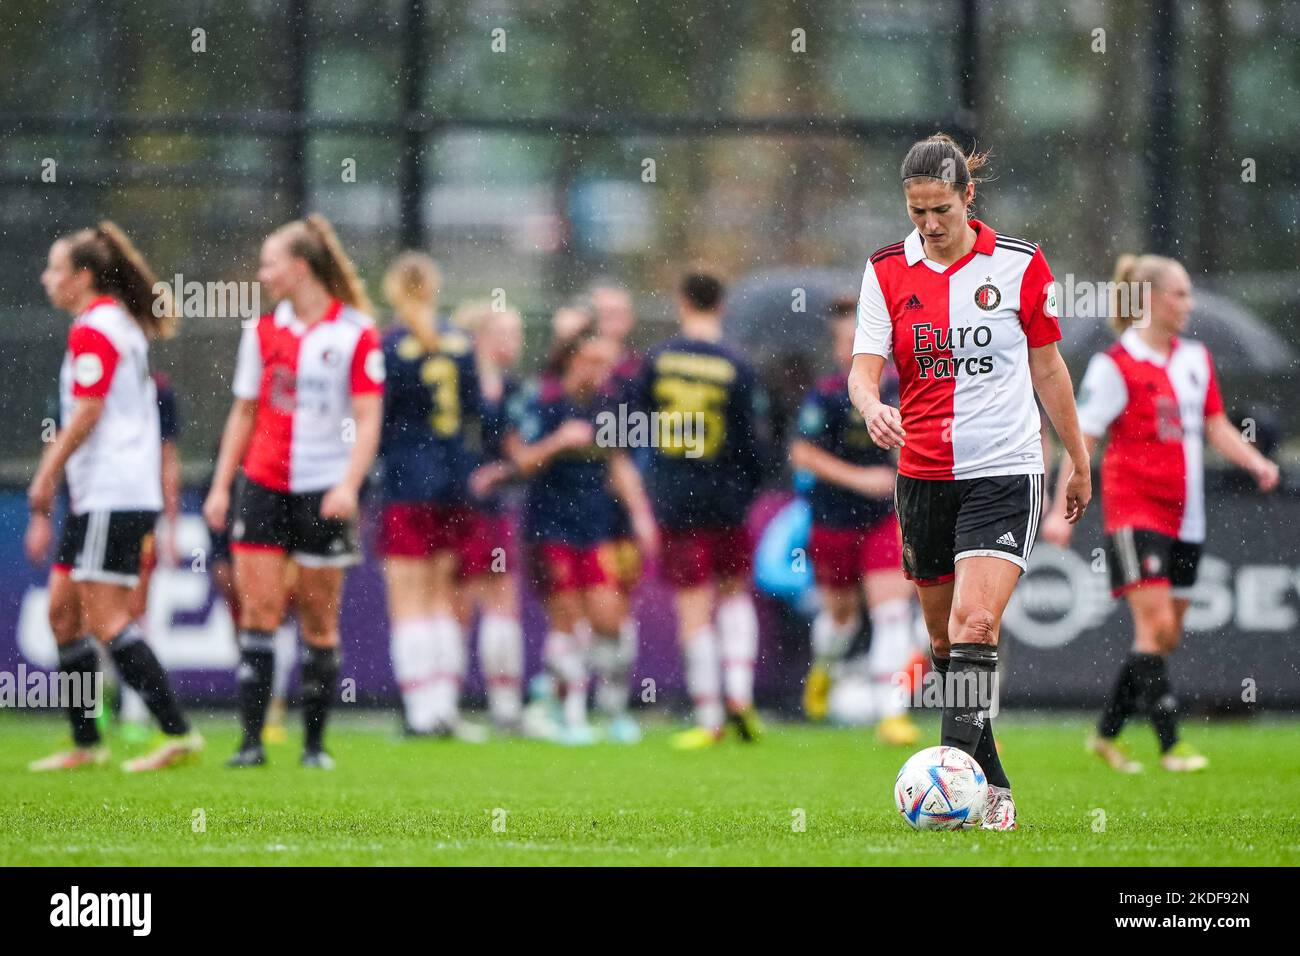 Rotterdam - Pia Rijsdijk of Feyenoord V1 reacts to the 0-4 during the match between Feyenoord V1 v Ajax V1 at Nieuw Varkenoord on 6 November 2022 in Rotterdam, Netherlands. (Box to Box Pictures/Tom Bode) Stock Photo